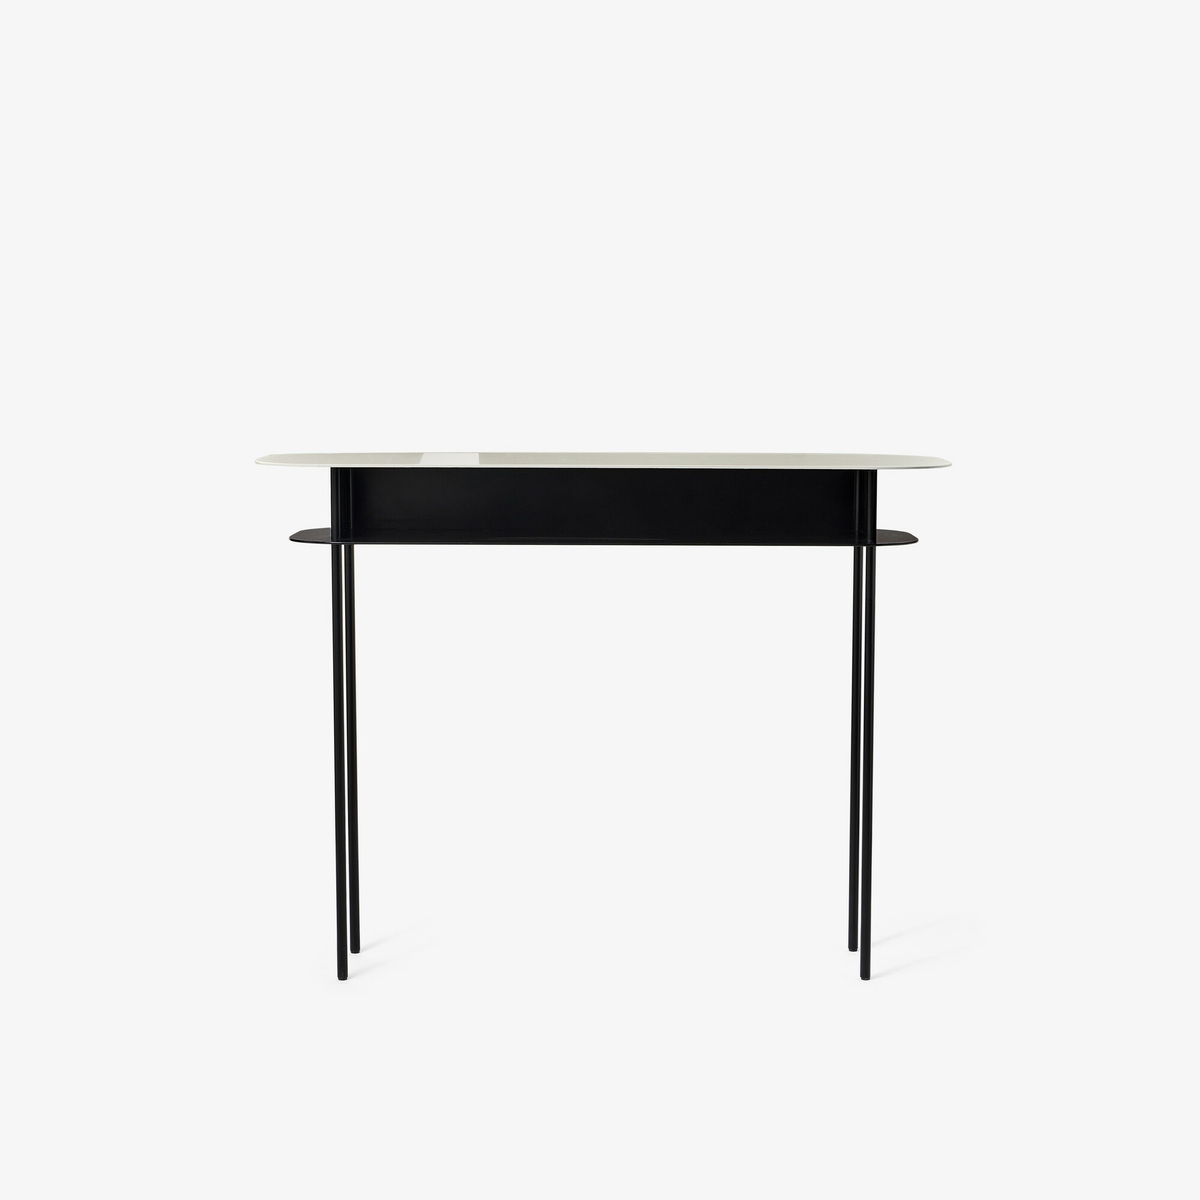 Console Table Tokyo, Off-White/Black - 110 x 40 x 85 cm - Powder coated steel - image 1